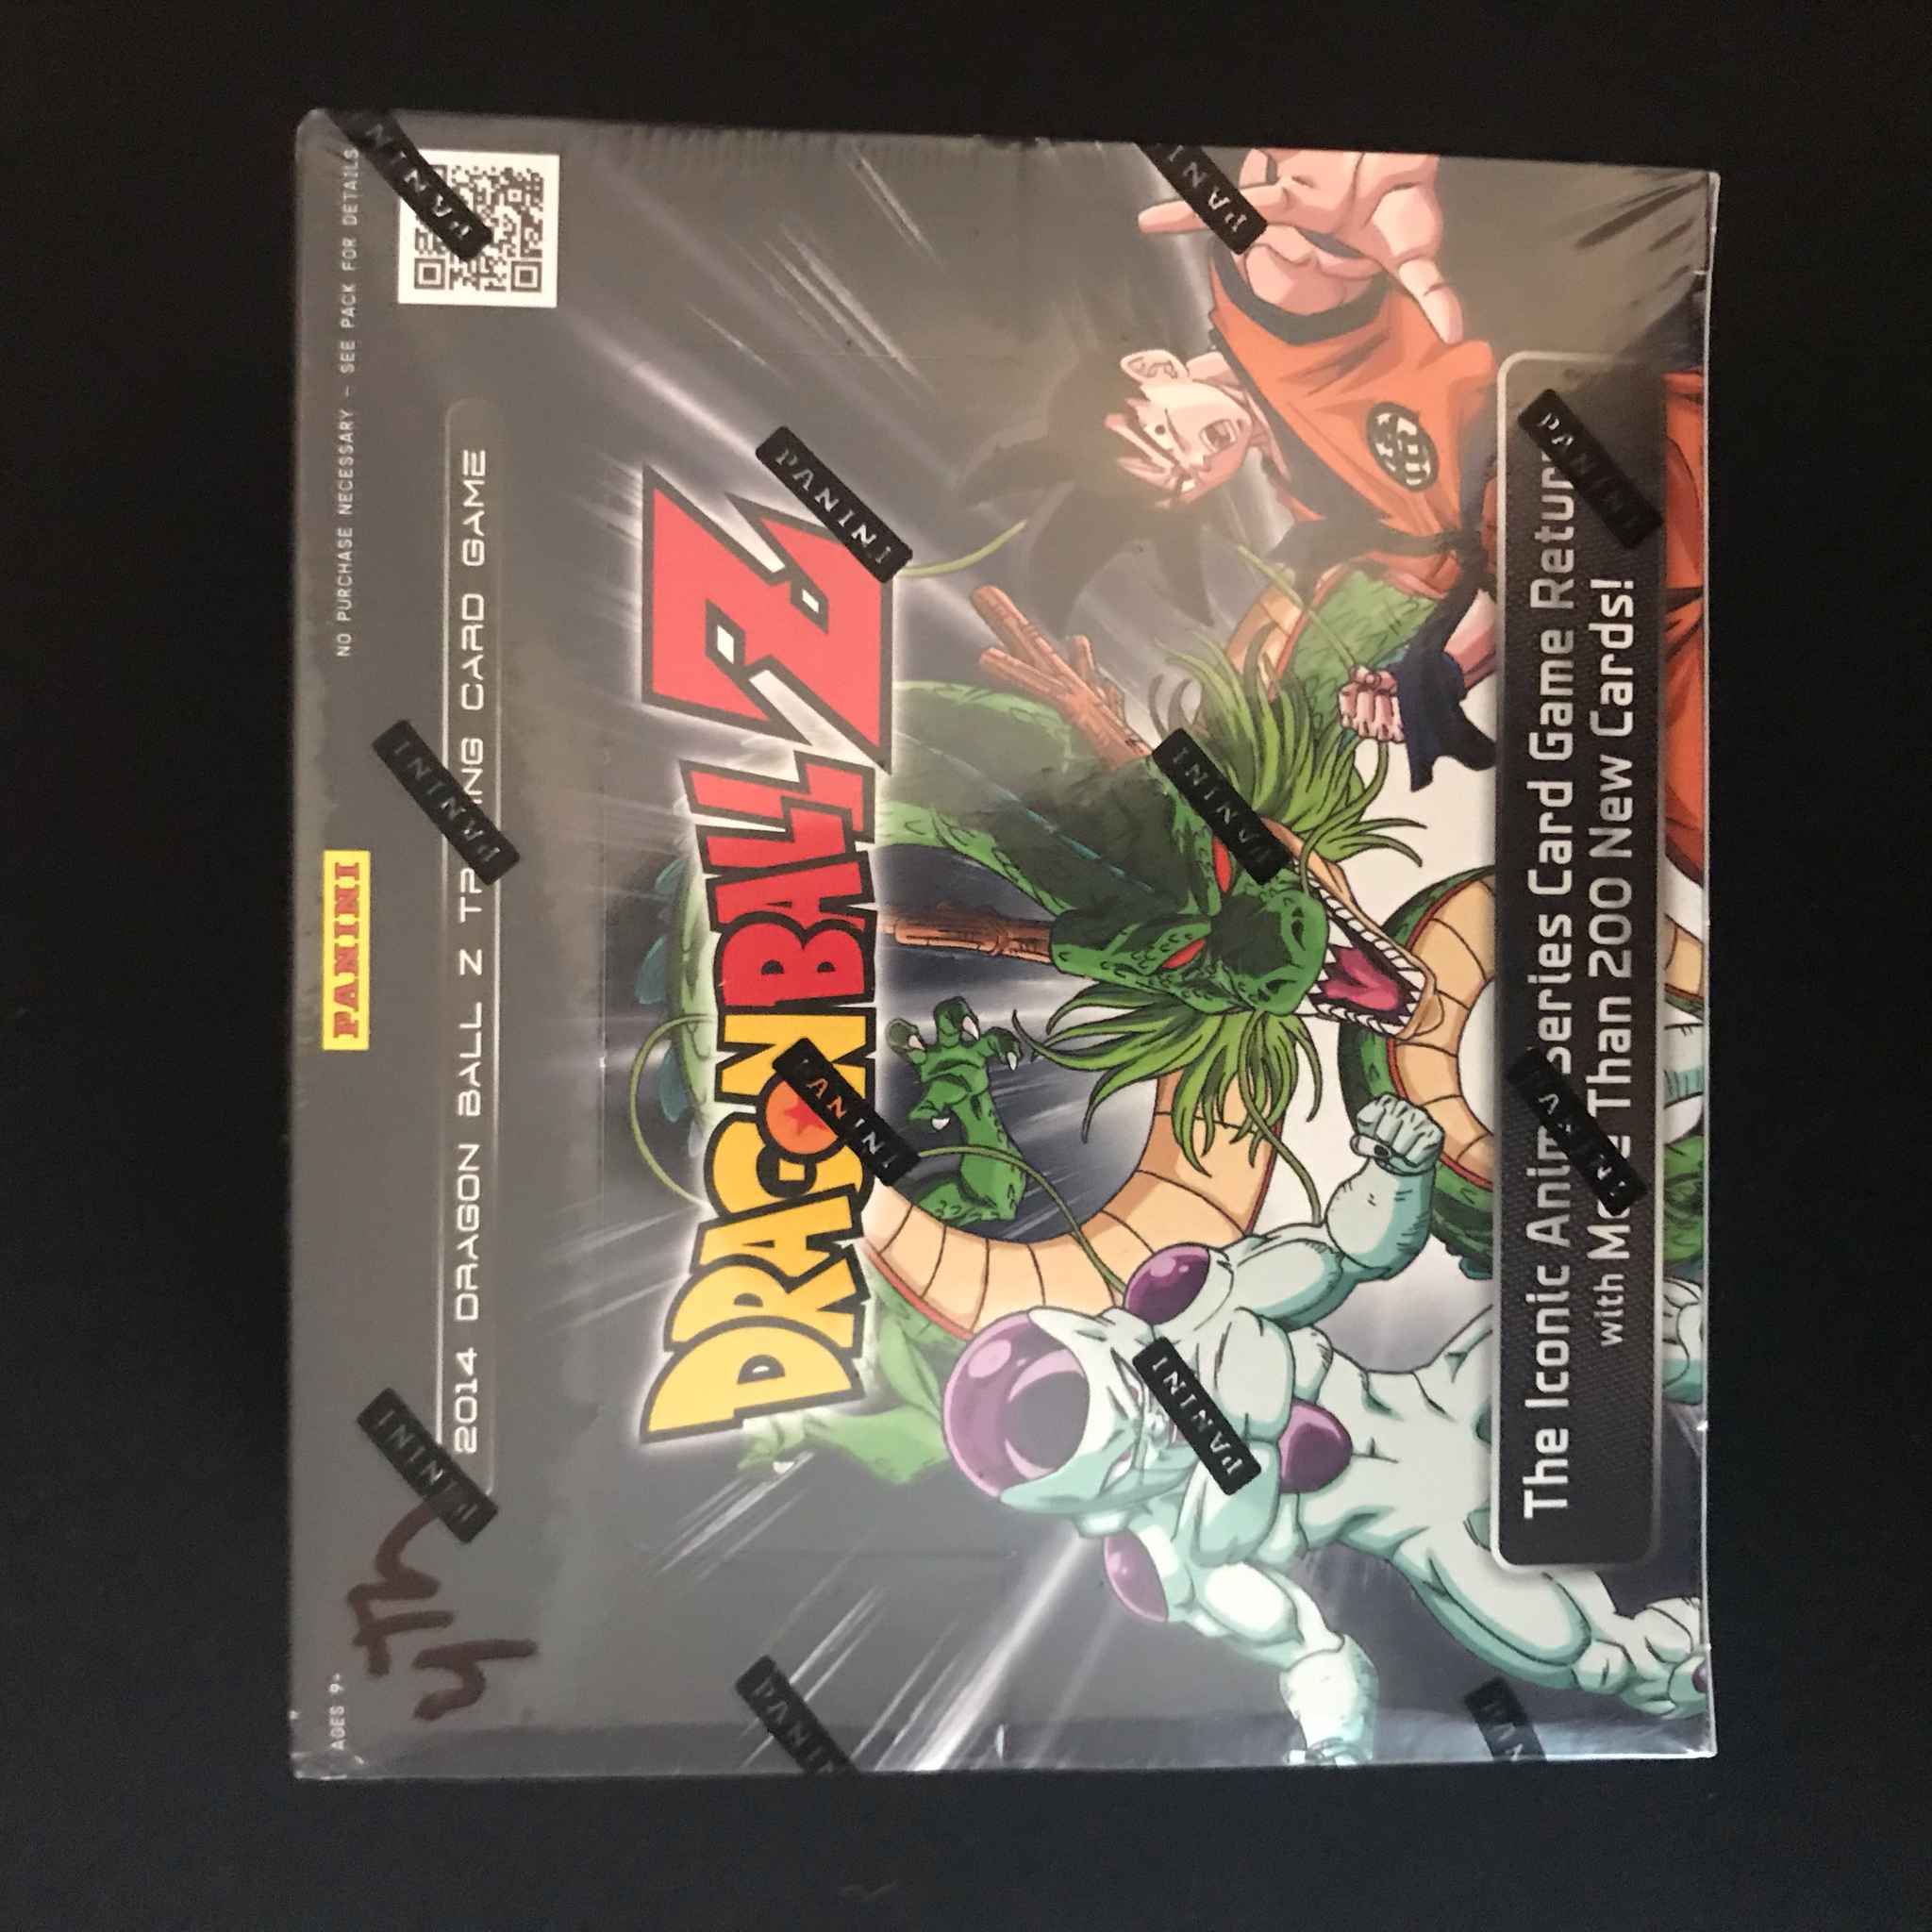 Details about   Panini Dragon Ball Z TCG New Sealed Booster Box Premier DBZ Cards Case Fresh! 